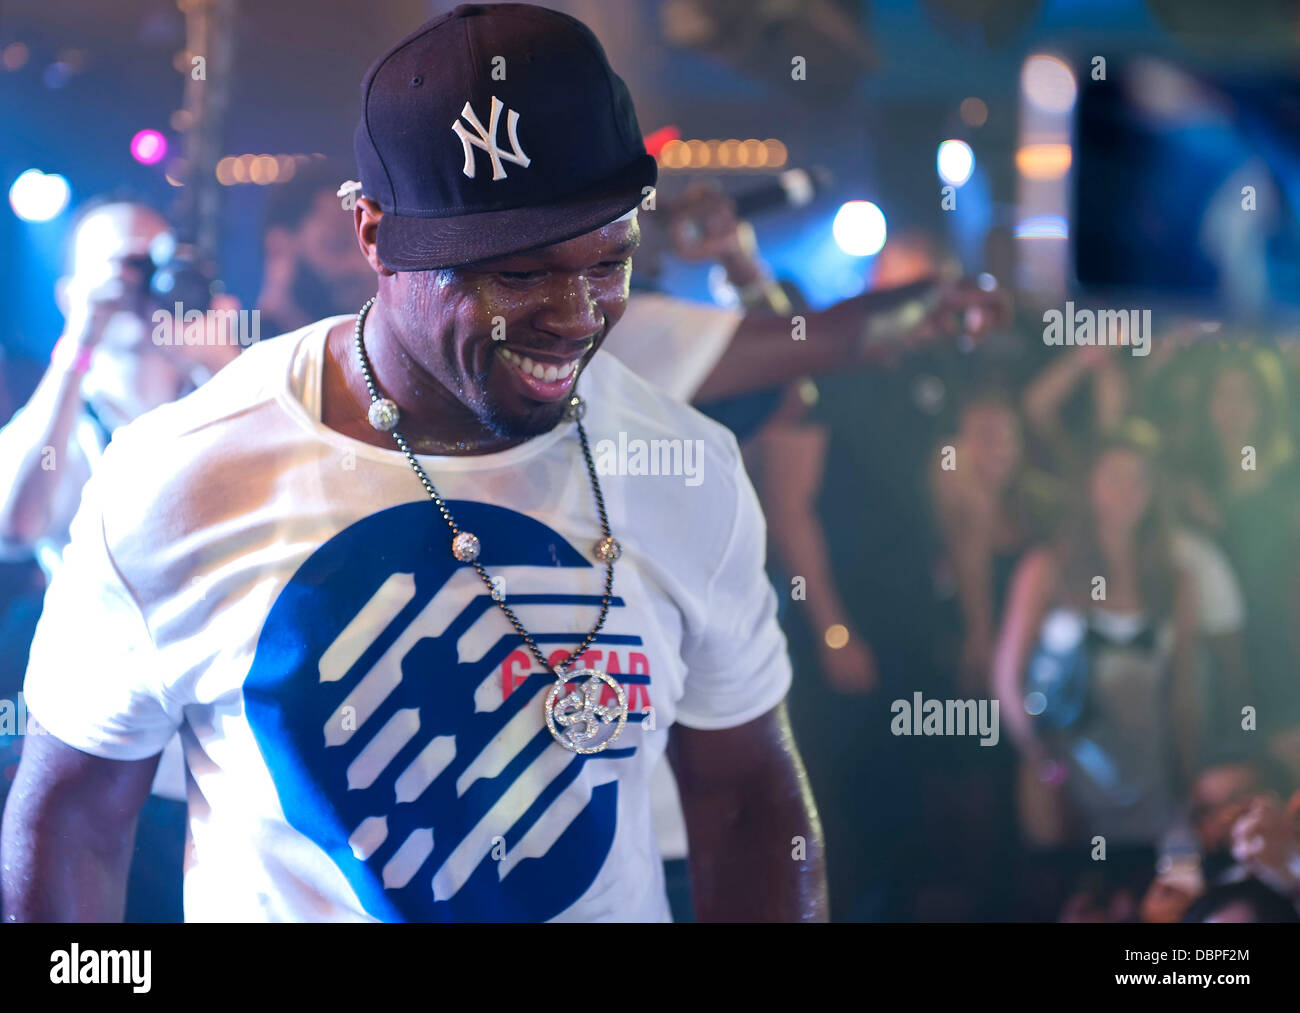 50 Cent, real name Curtis Jackson, performs at Palais Club Cannes Cannes, France - 16.08.11 Stock Photo